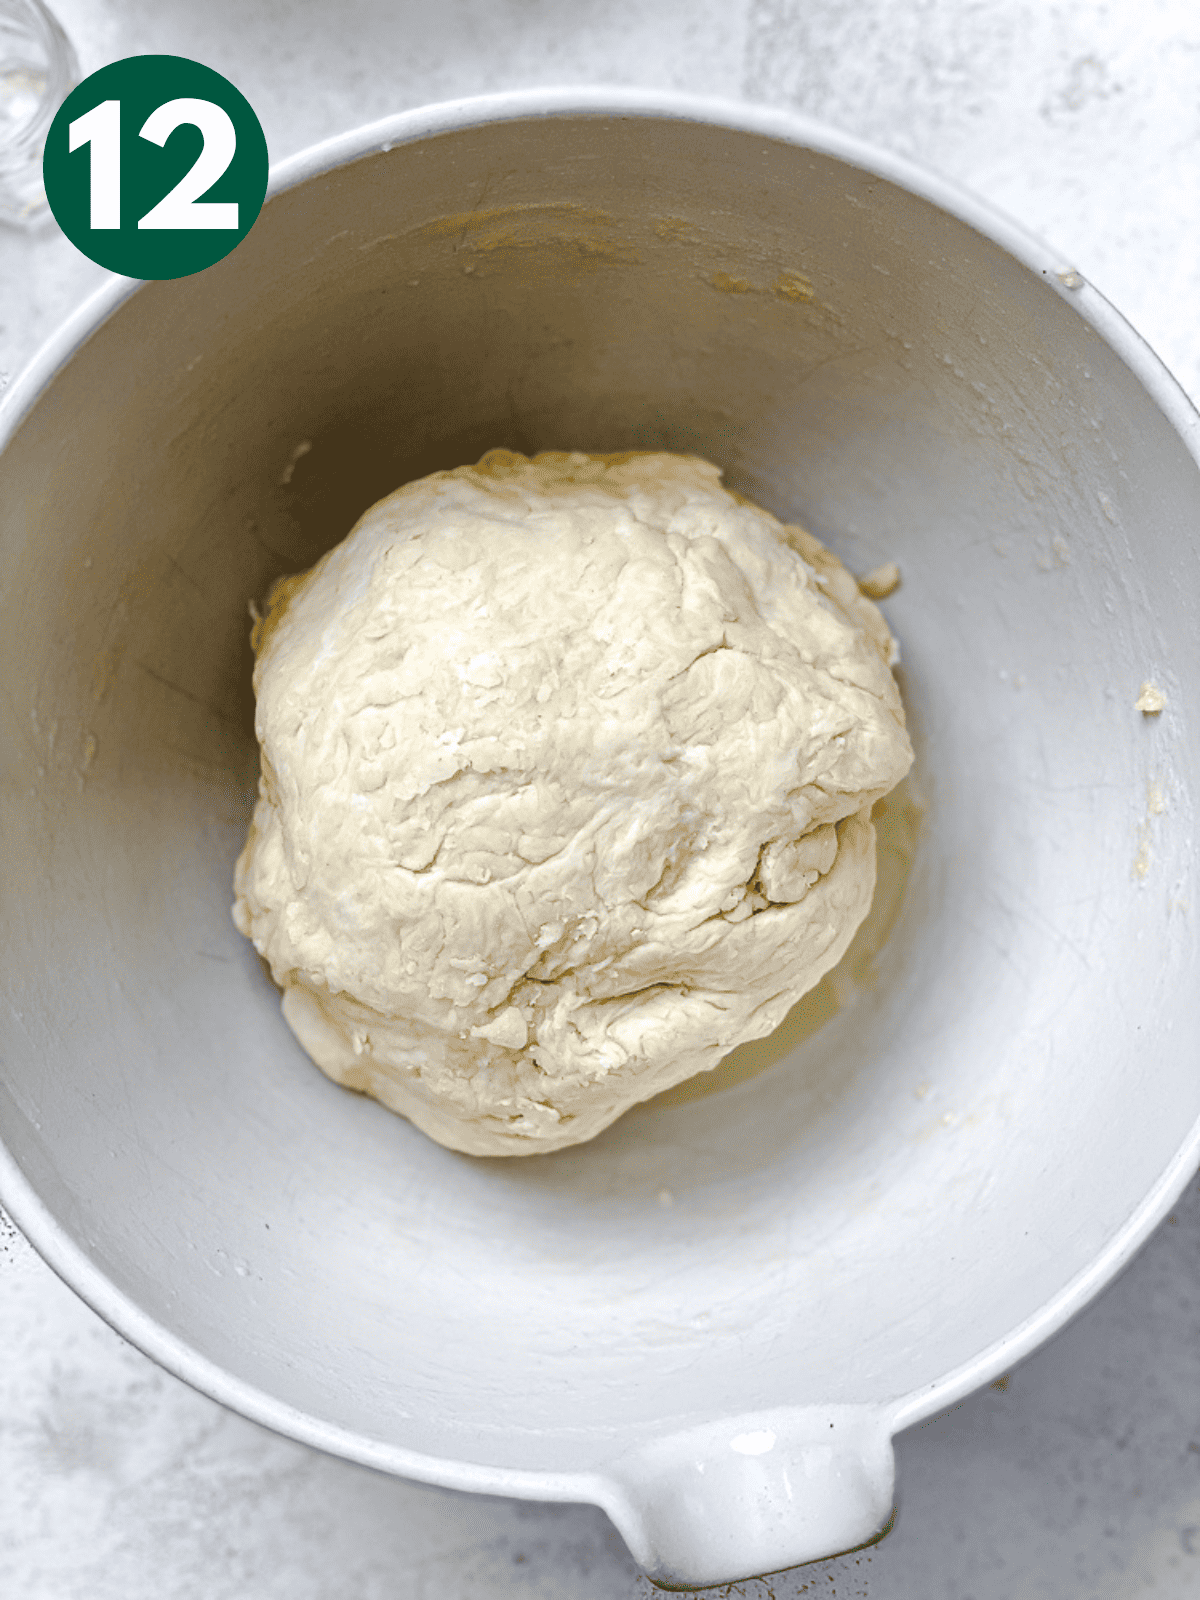 a ball of dough on top of oil in a large white bowl.